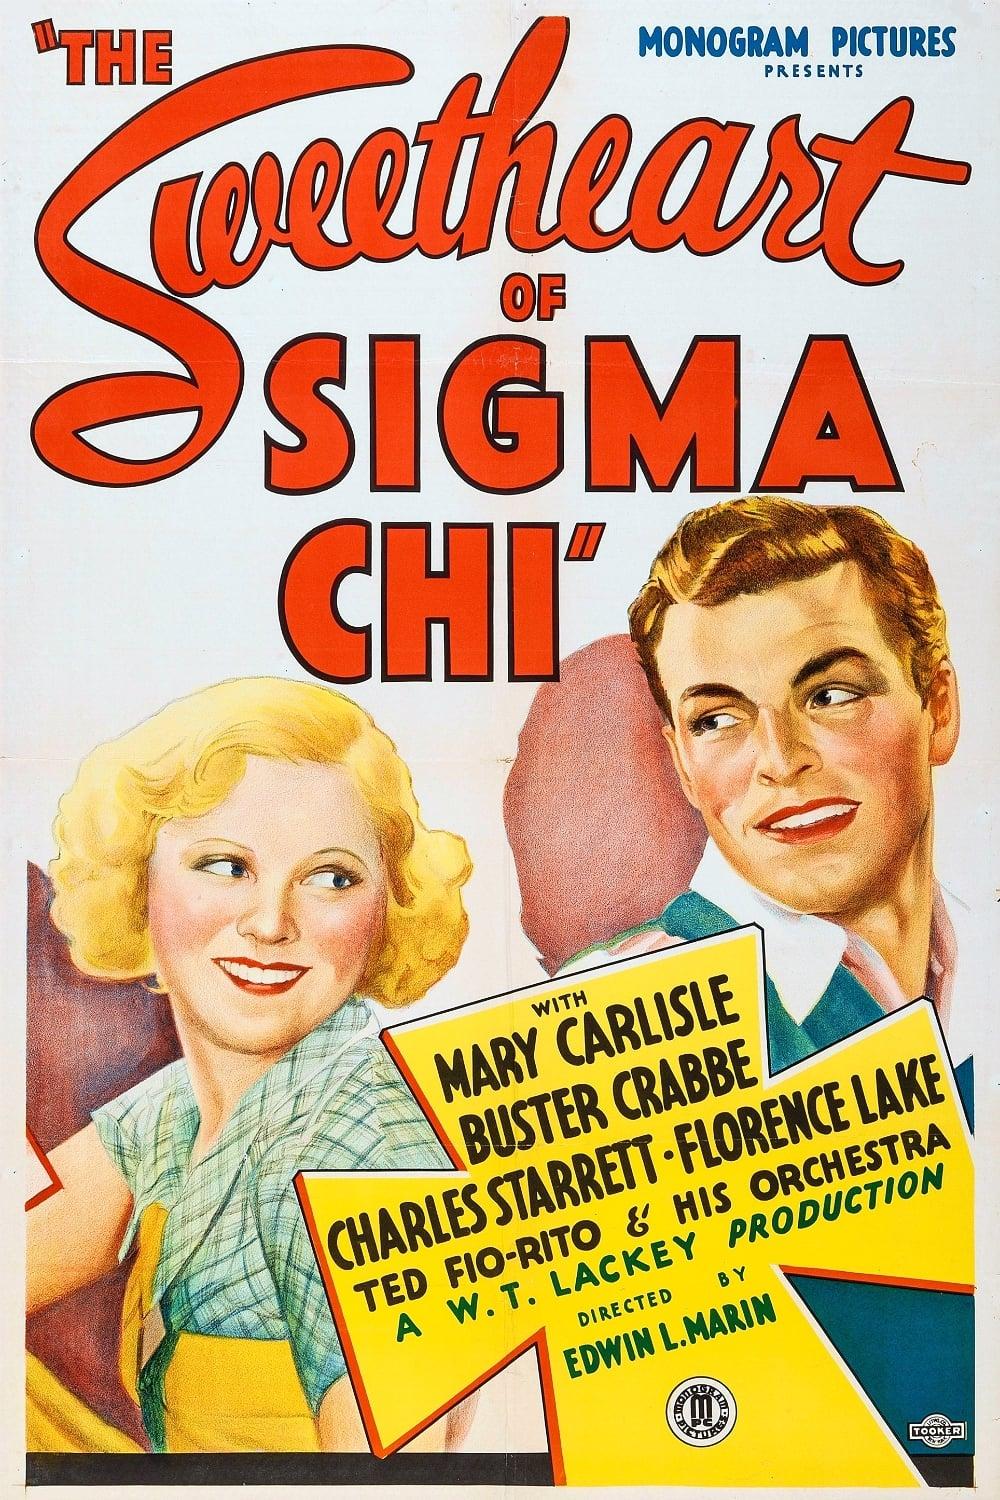 The Sweetheart of Sigma Chi poster